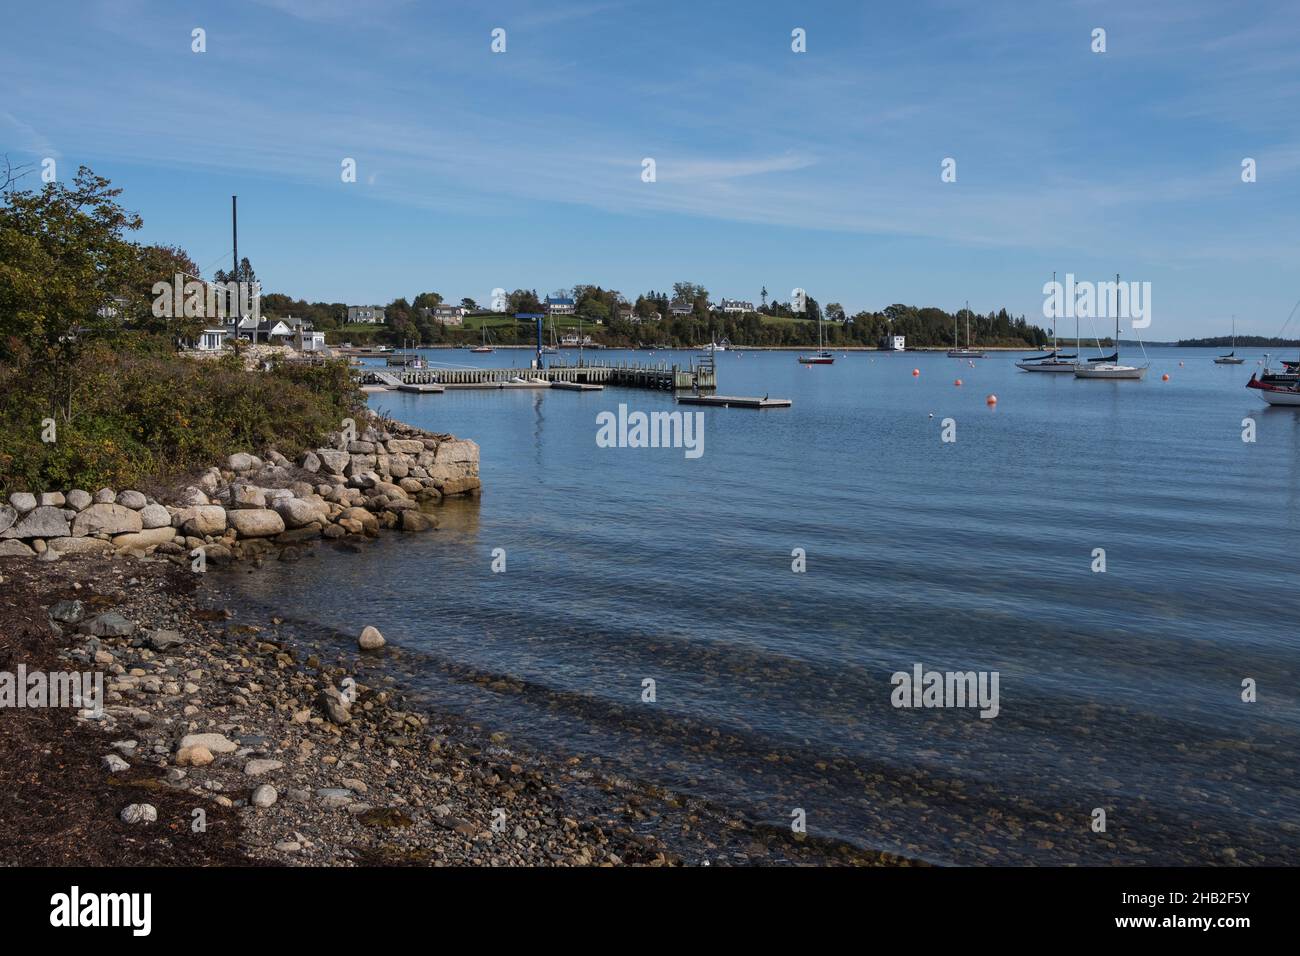 Chester Front harbour and Yacht Club, Nova Scotia, Canada Stock Photo